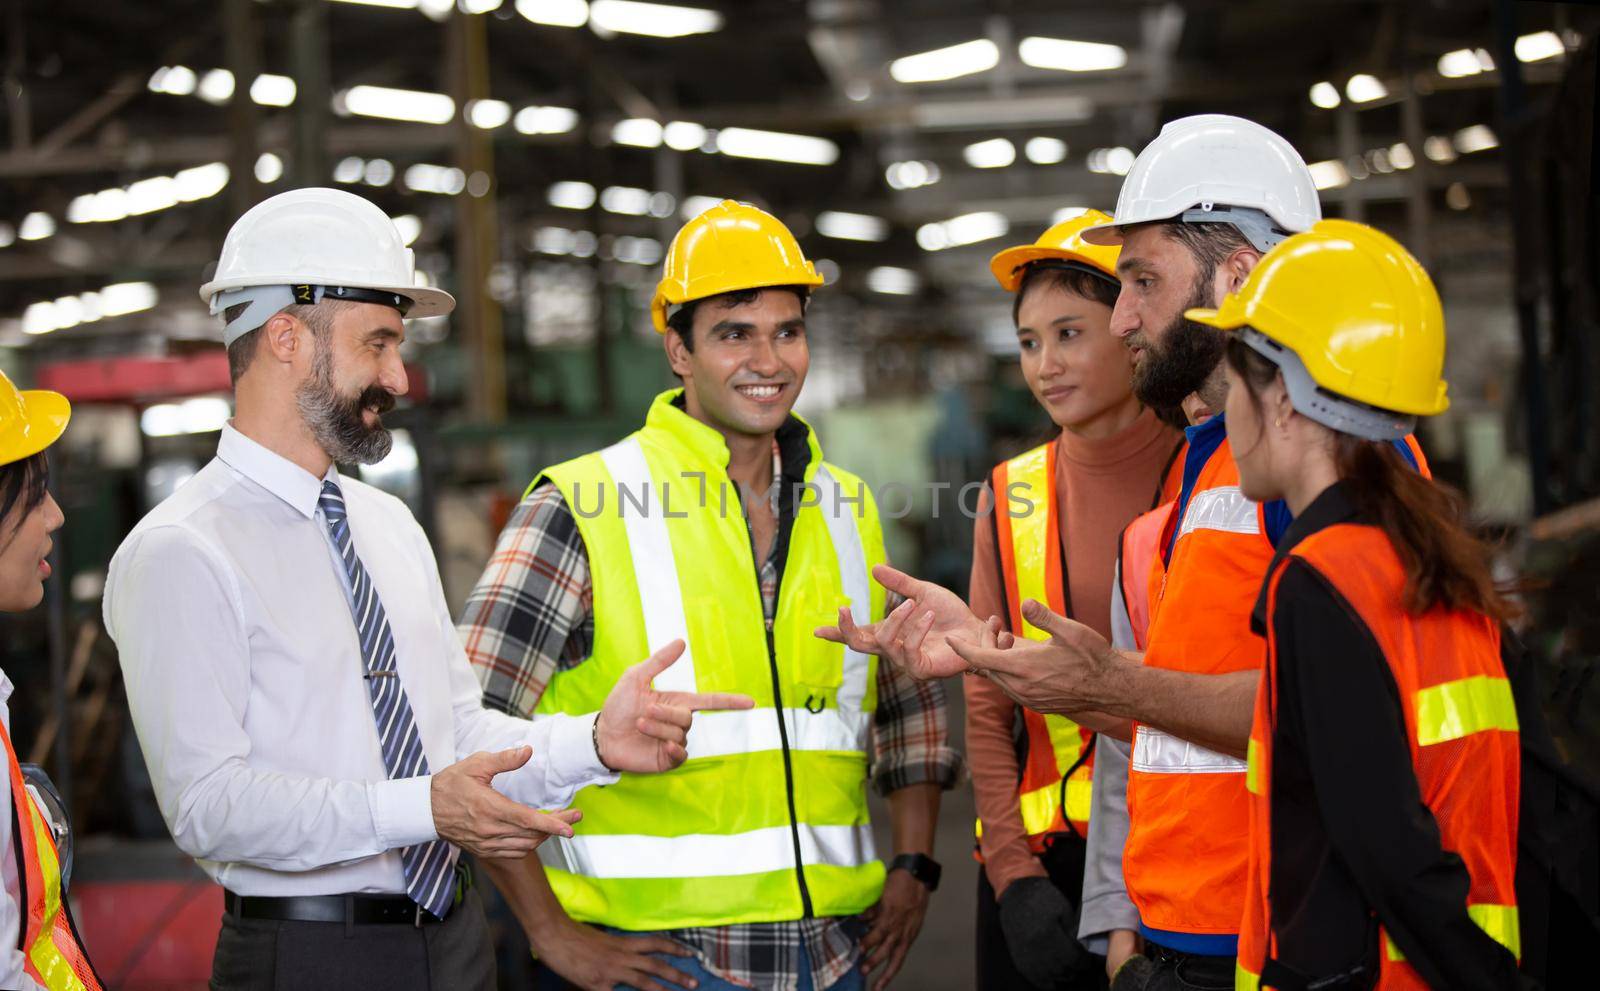 group of workers, change of workers in the factory, people go in helmets and uniforms for an industrial enterprise